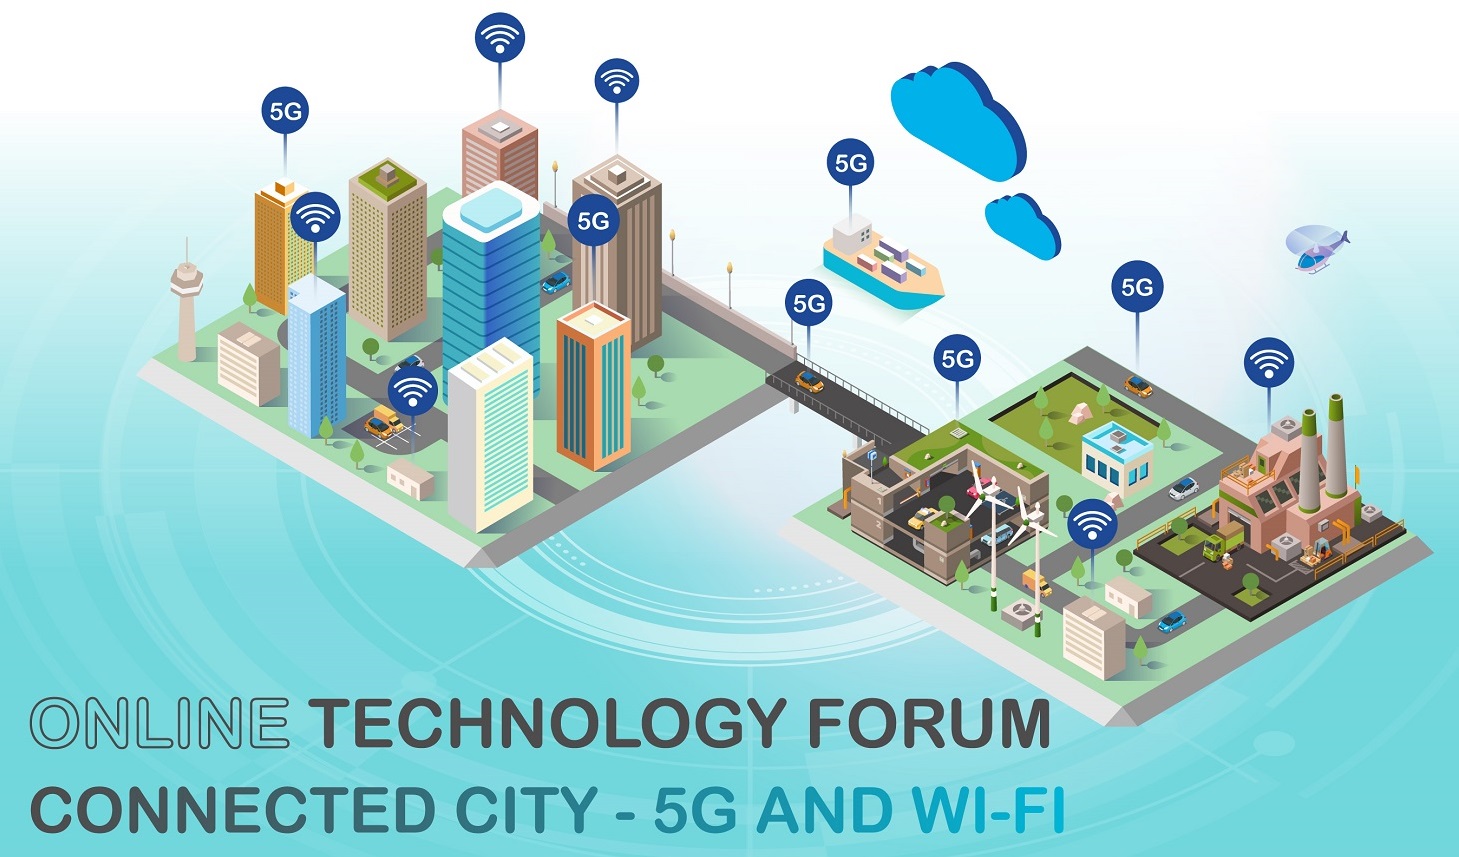 Technology Forum - Connected City - 5G and Wi-Fi